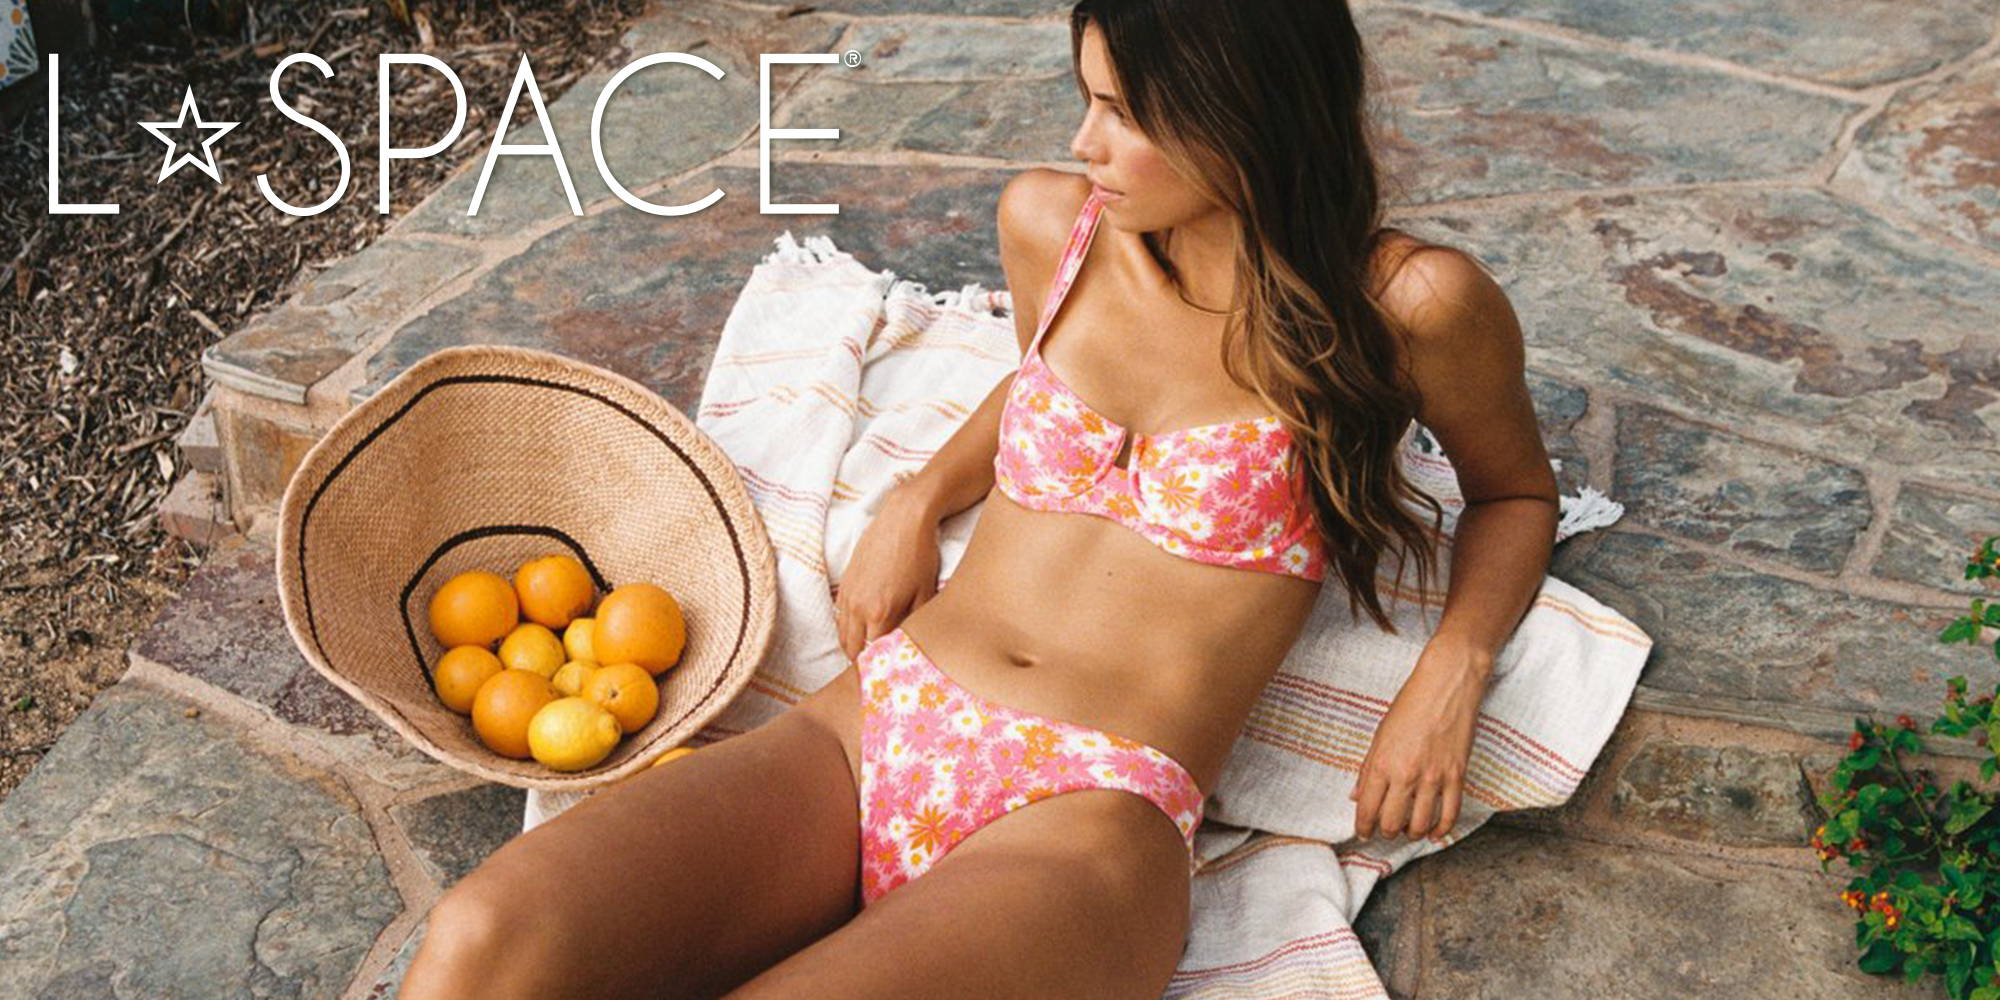 Women's L*Space swimwear in floral prints and bright colors